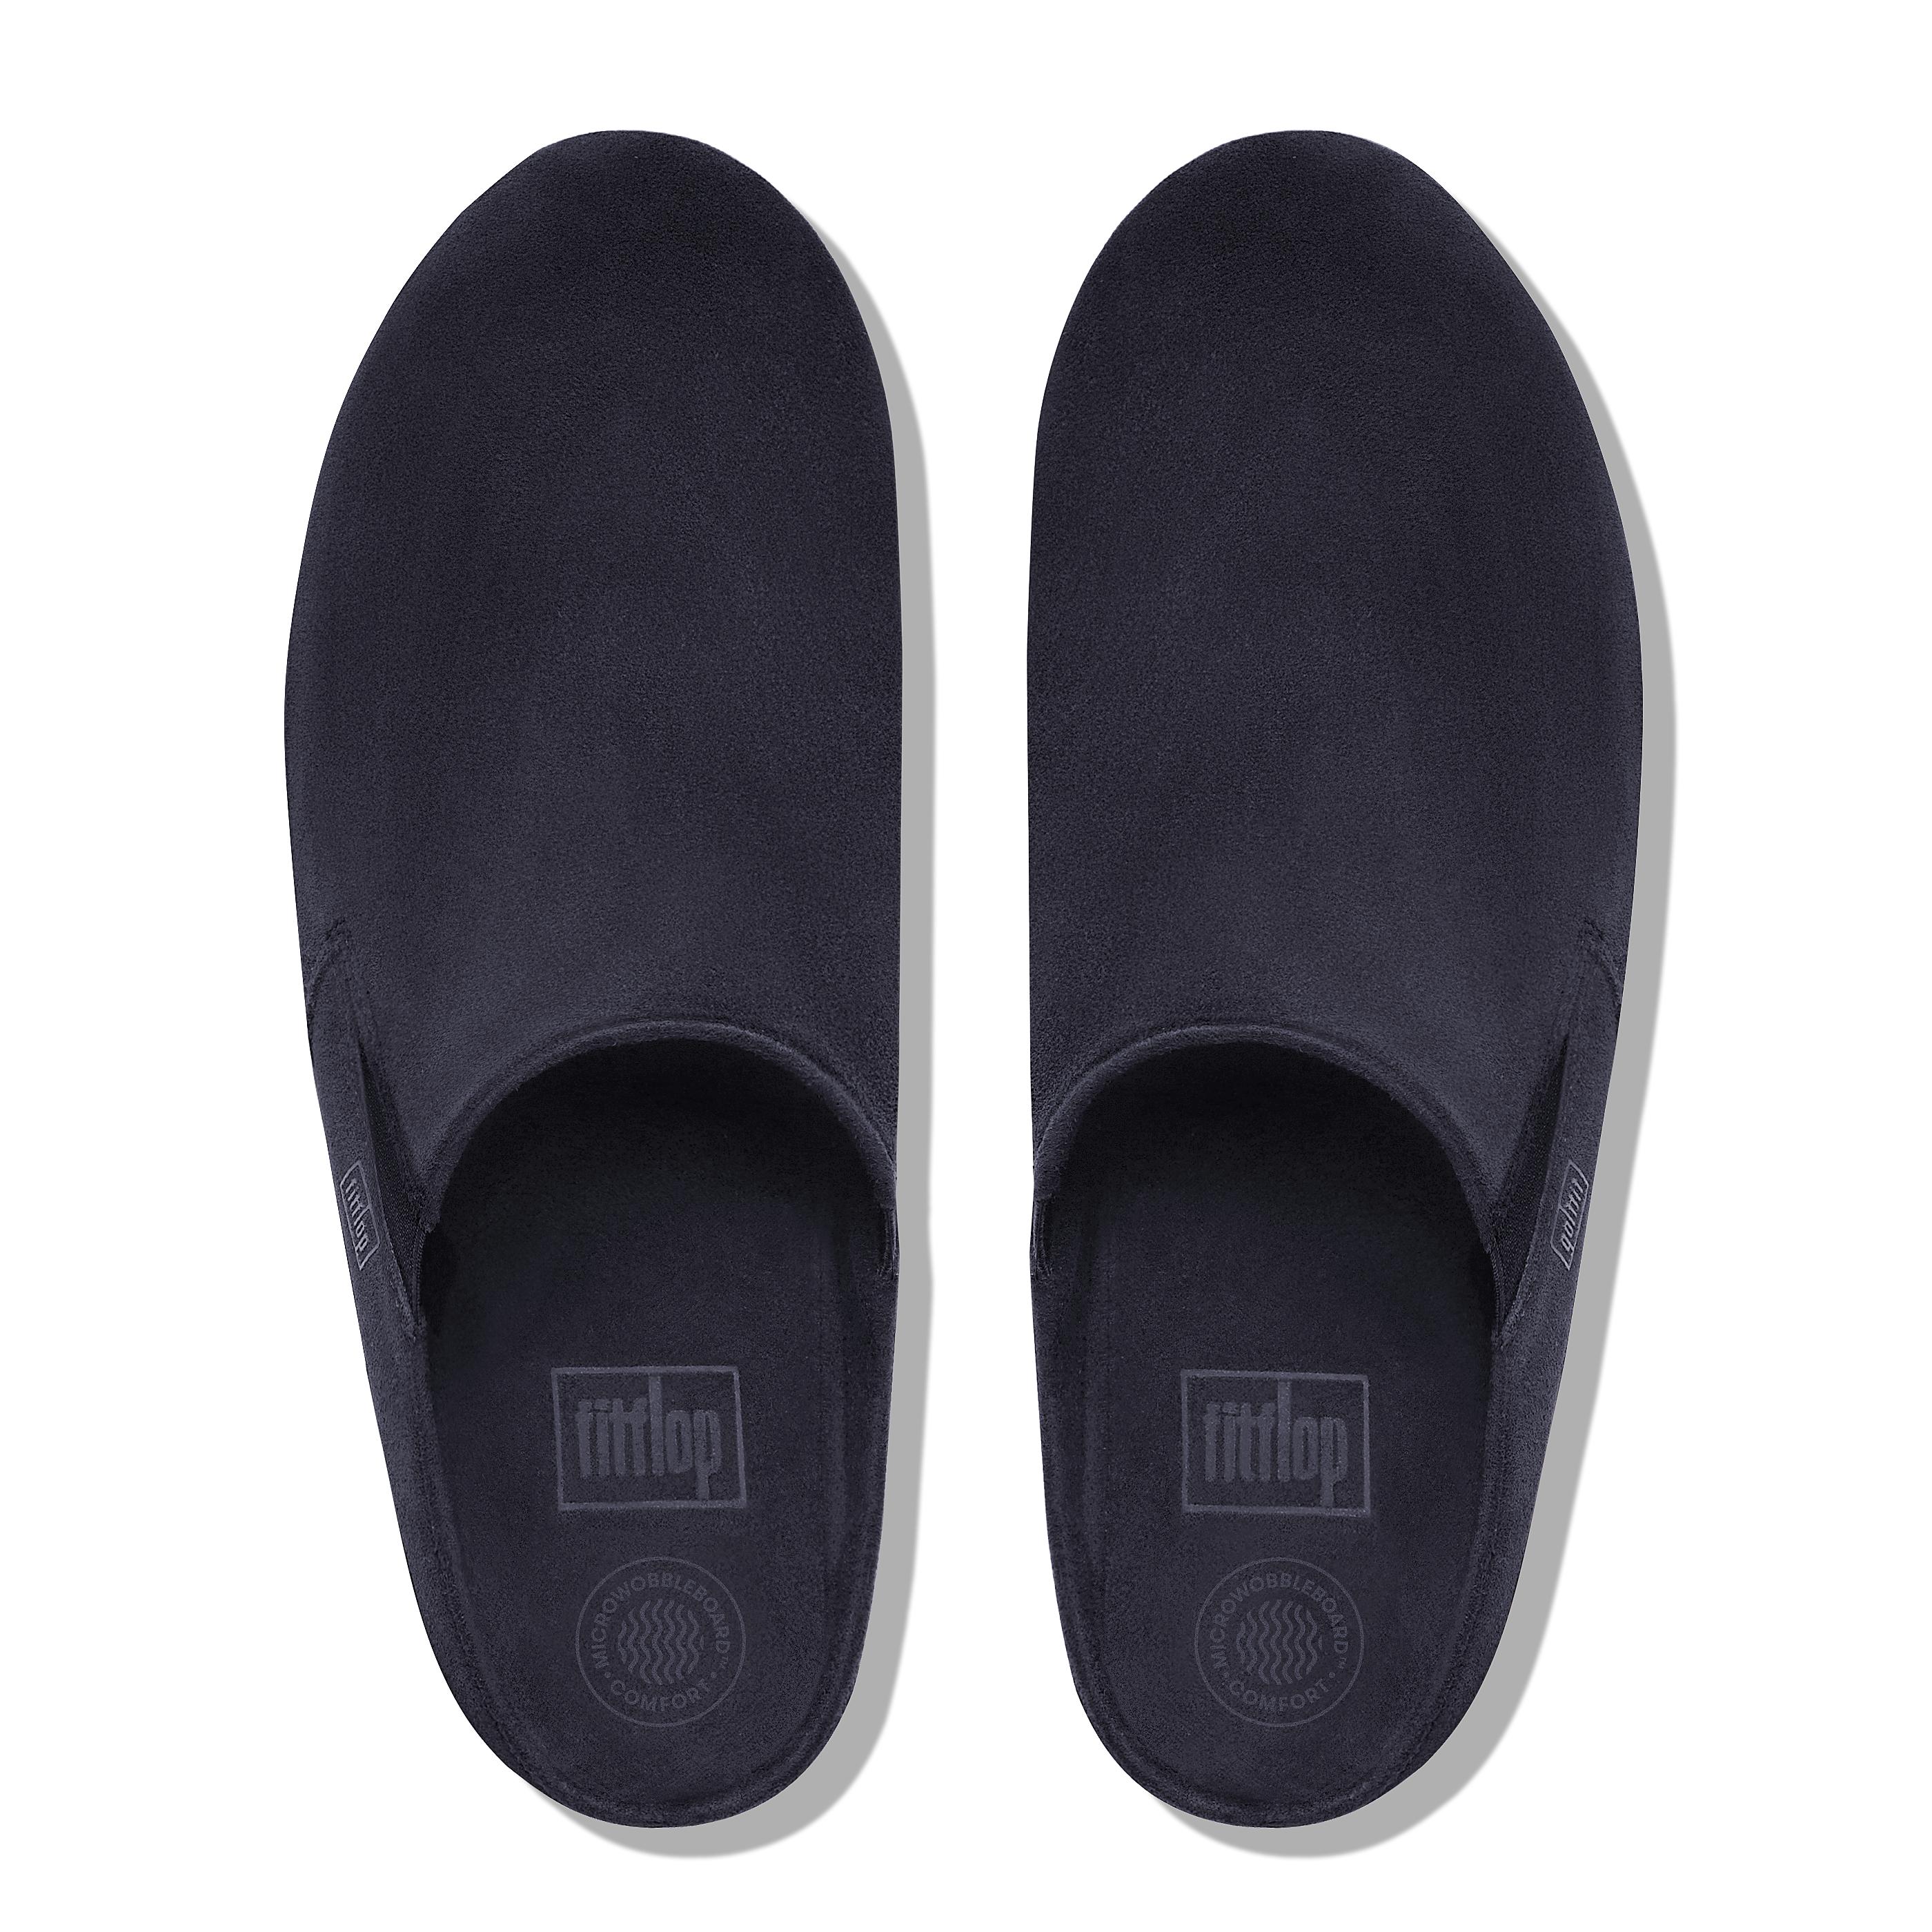 fitflop suede clogs